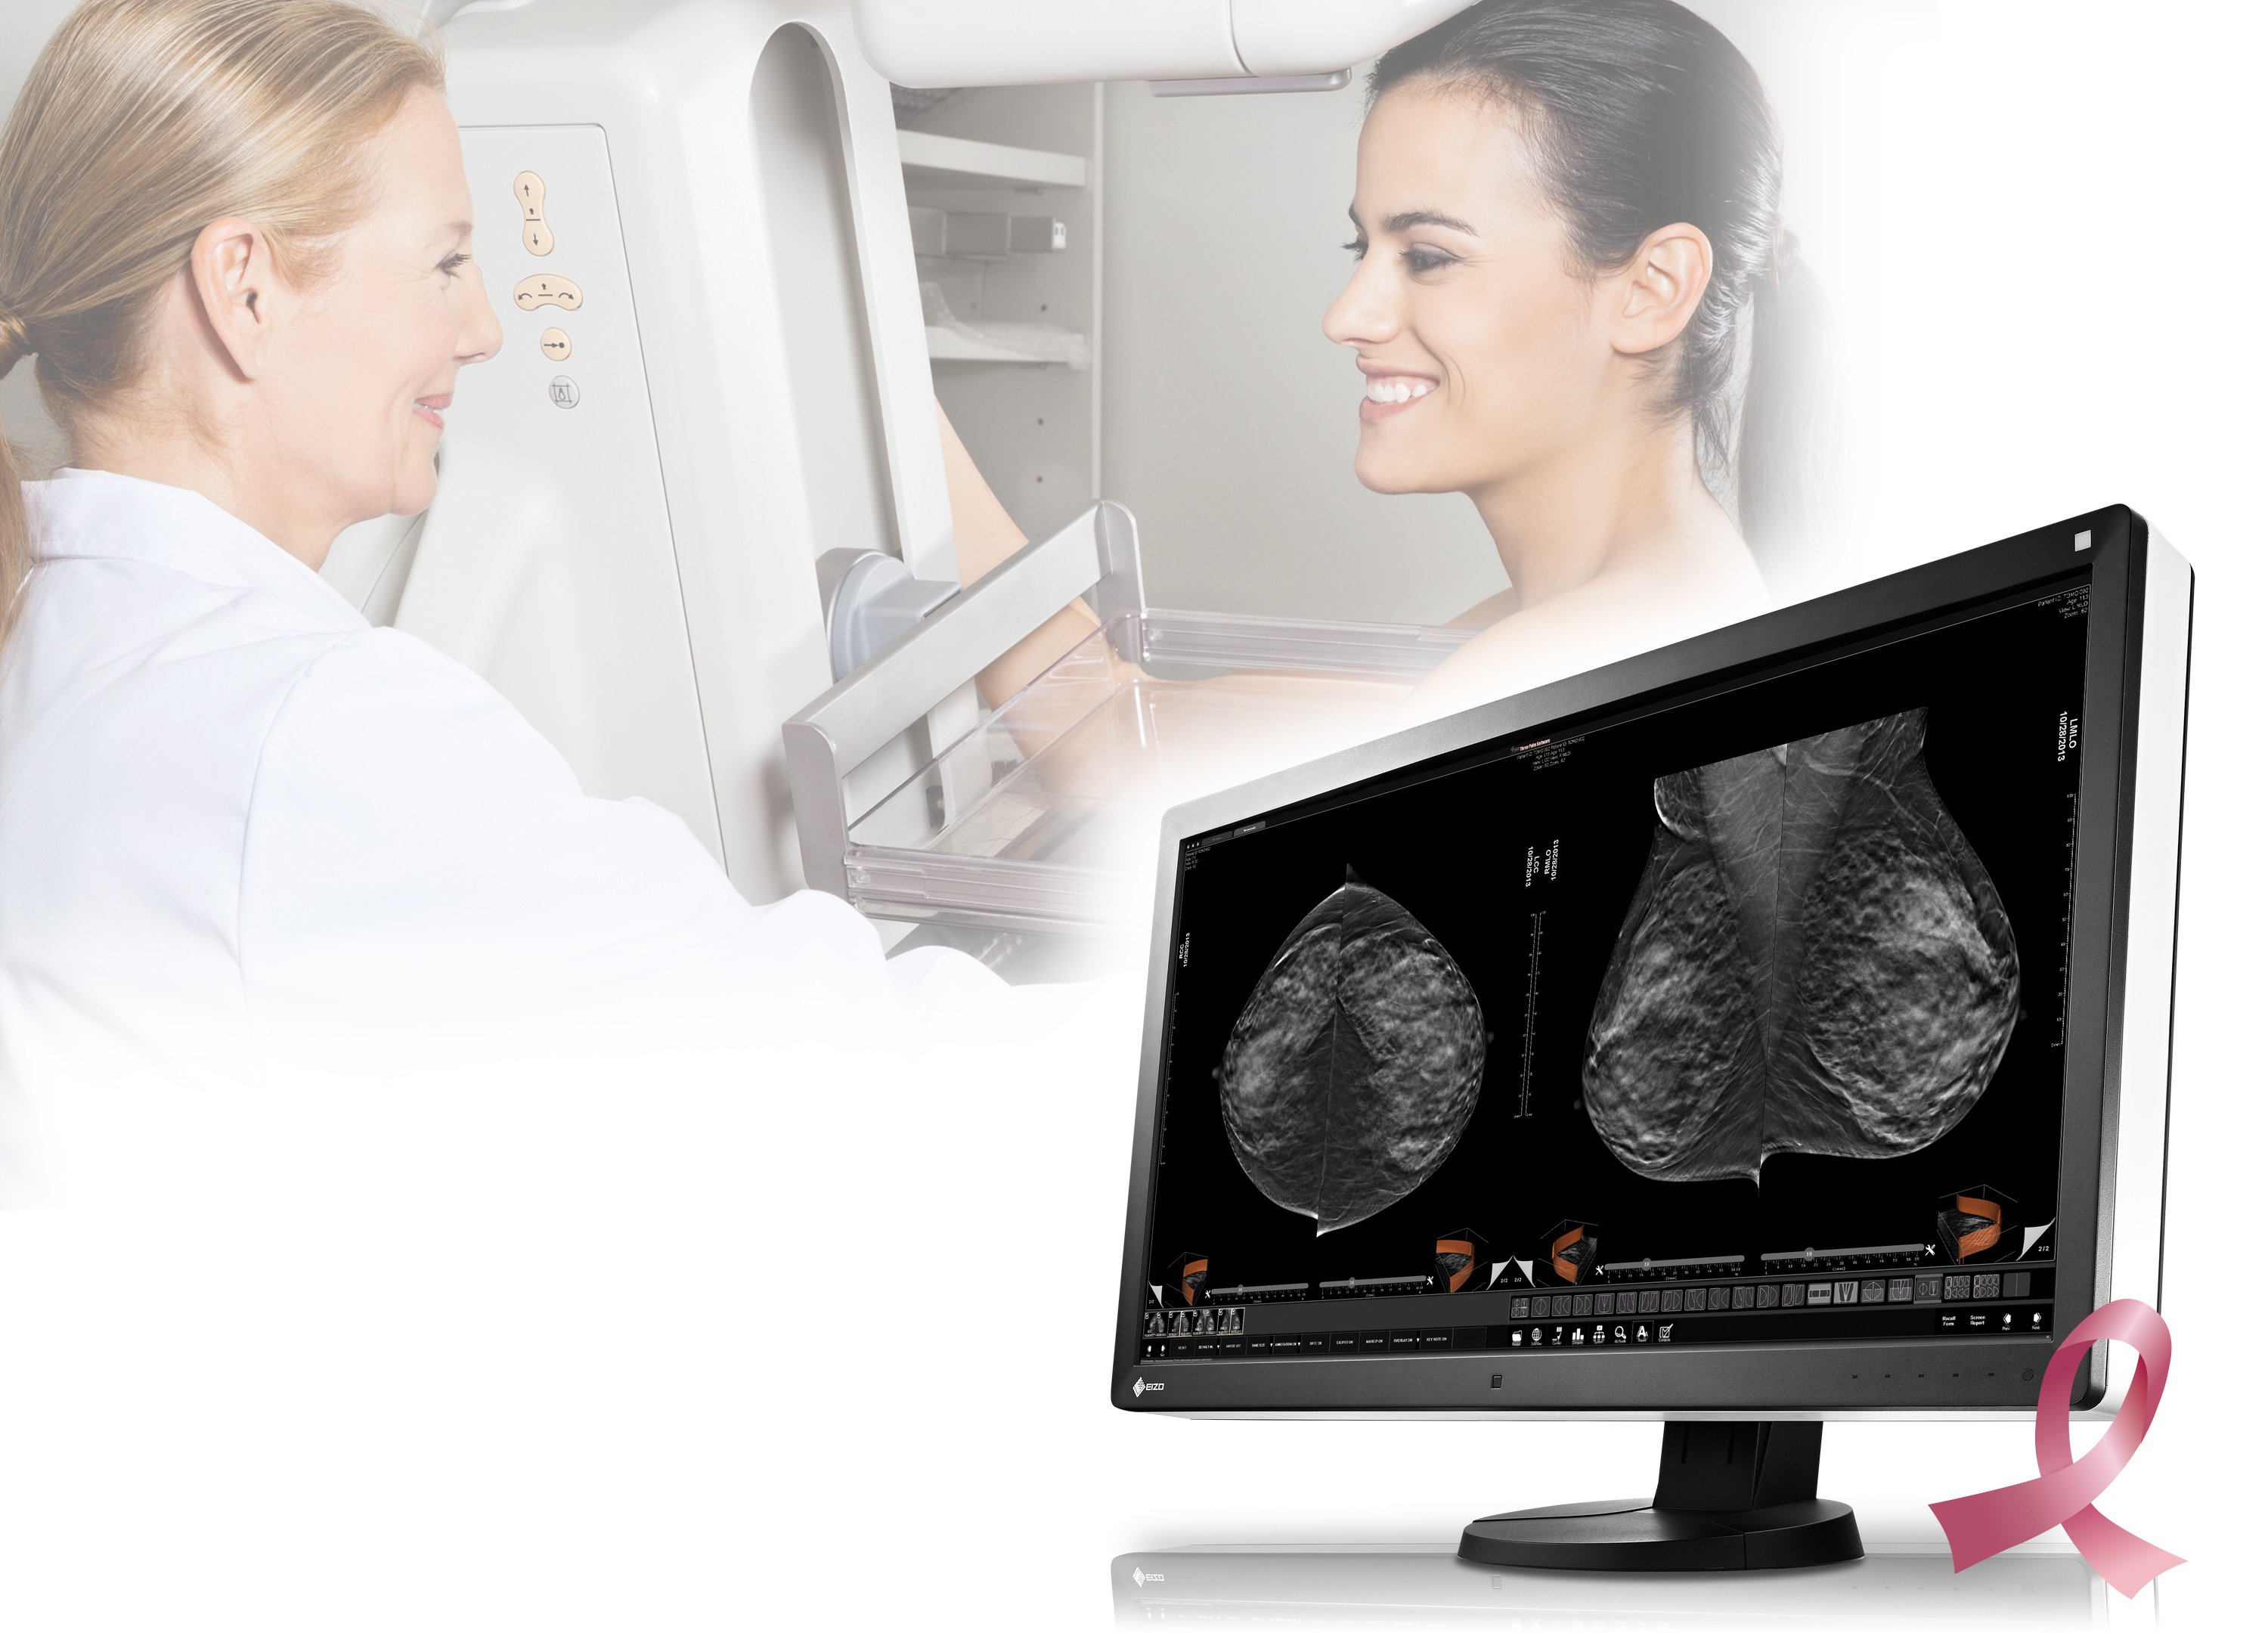 Traditional mammography continues to be the gold standard for breast cancer screening technologies. However, use of 3-D breast tomosynthesis is growing rapidly.